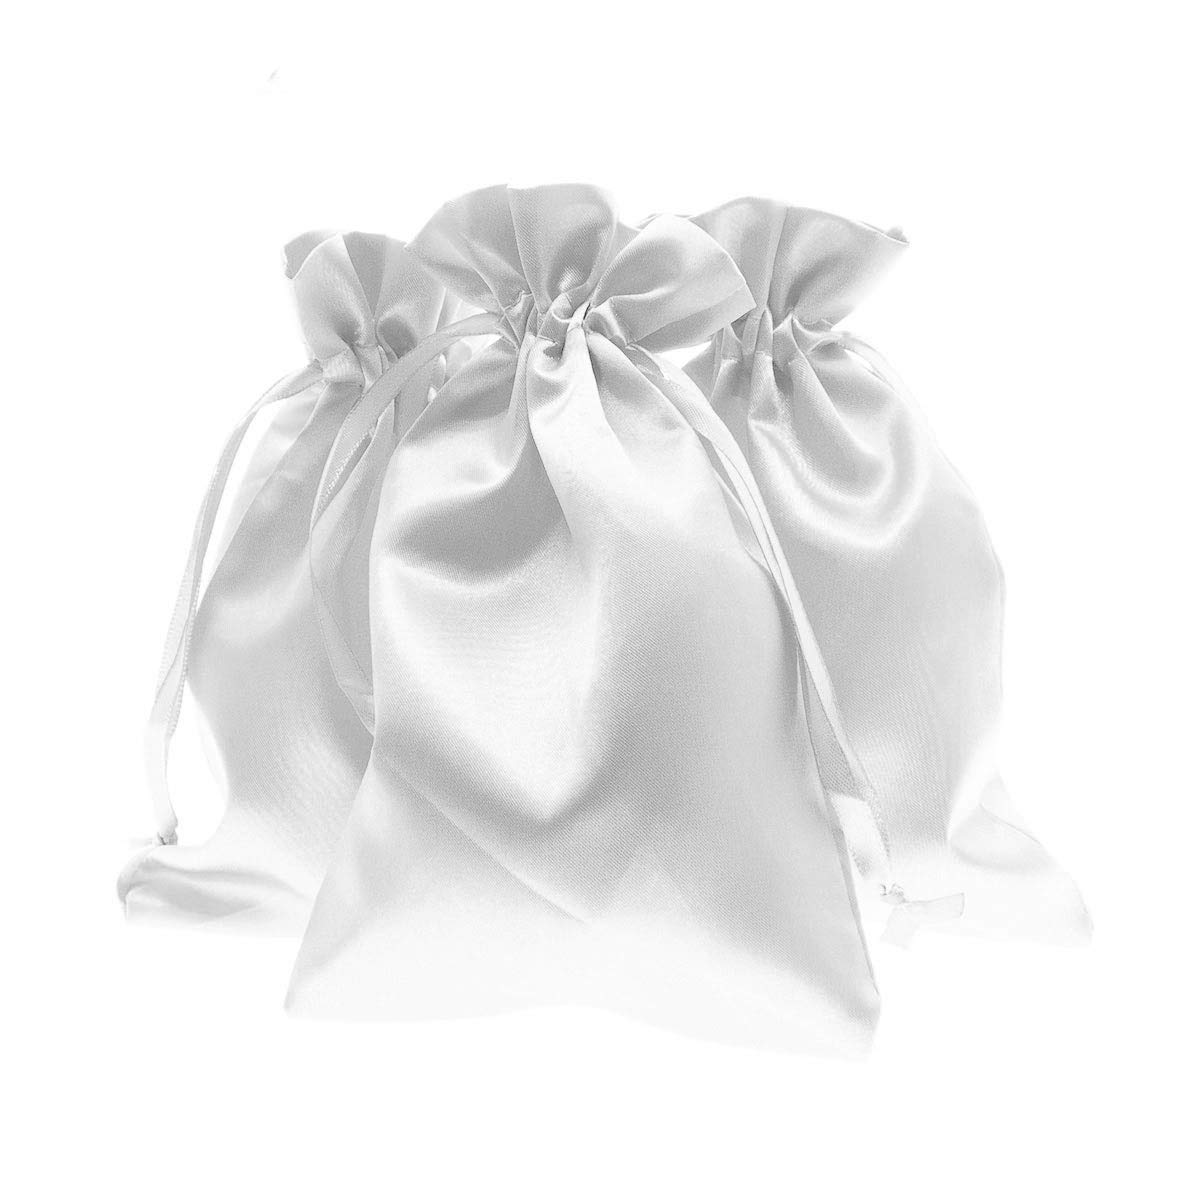 Knitial 6 X 9 Satin White Gift Bags, Jewelry Bags, Wedding Favor  Drawstring Bags Baby Shower Christmas Gift Bags 50 Per Pack